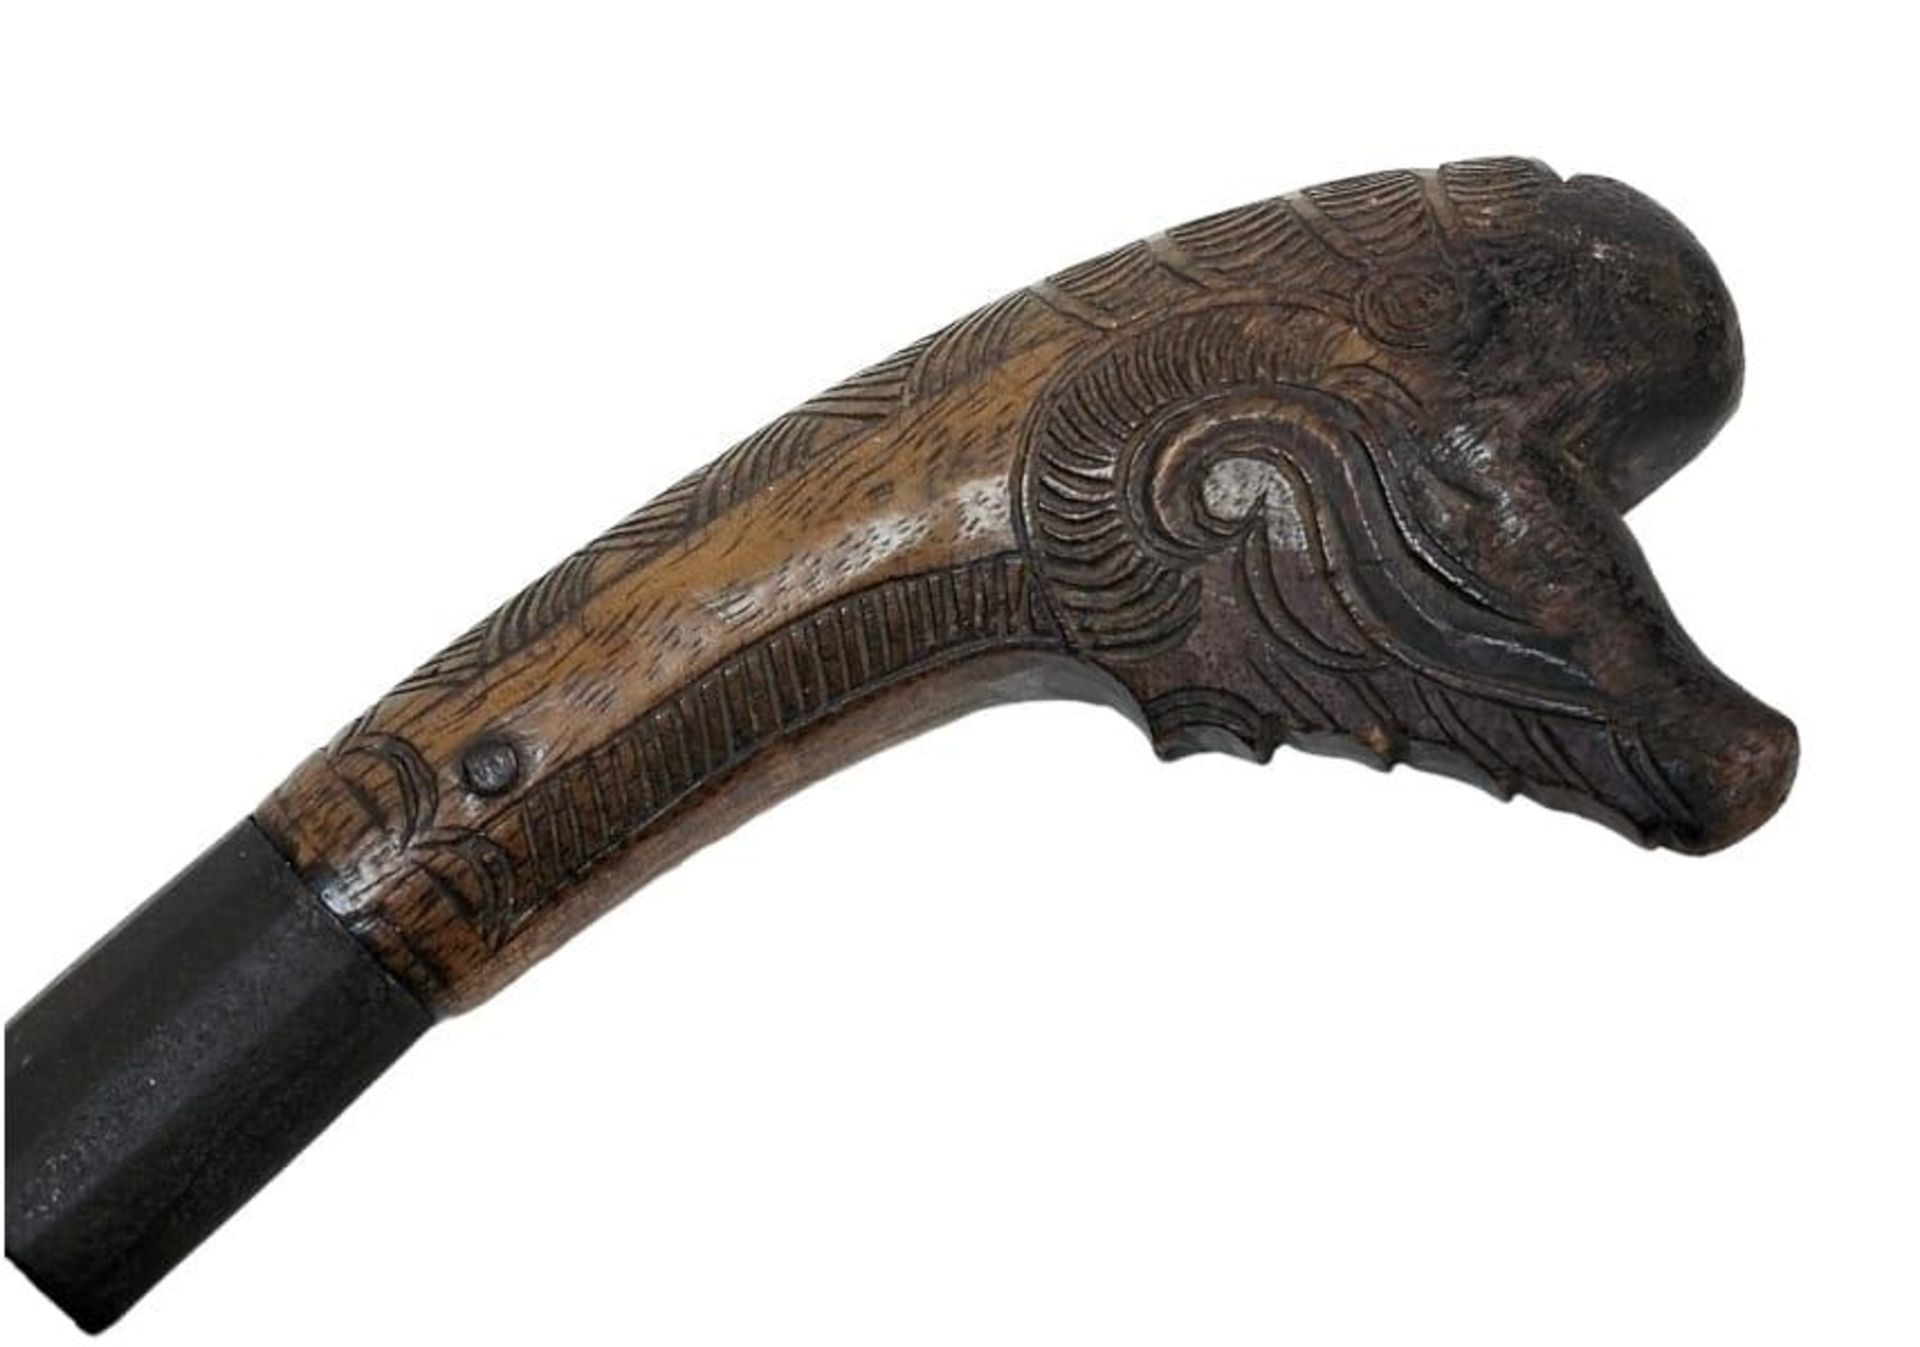 A Very Rare 19 th Century Oriental Short Sword with Wooden Hilt Carved as a Mythical Creature. - Bild 4 aus 11